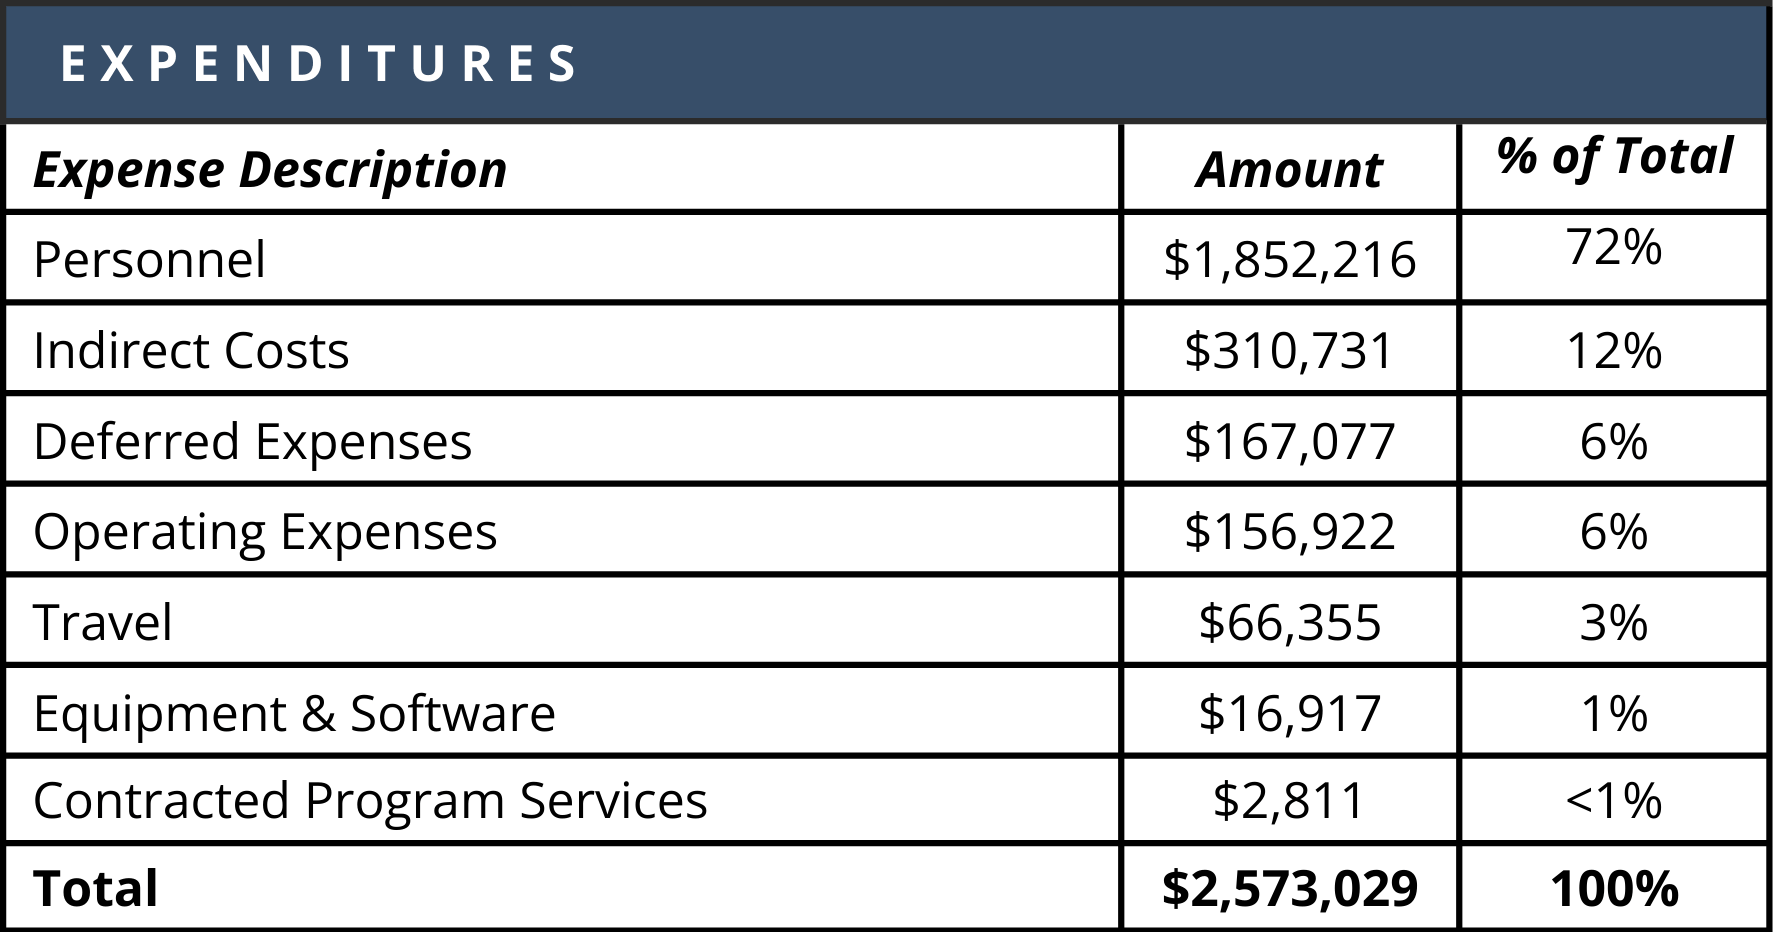 Expense Description of expenditures breaks down as follows, Personnel - 1,852,216 or 72% Indirect Costs - 310,731 or 12% Operating Expenses - 156,922 or 6% Contracted Program Services - 2,811 or less than 1% Deferred Expenses - 467,077 or 6% Travel - 66,355 or 3% Equipment & Software - 16,917 or1 1%